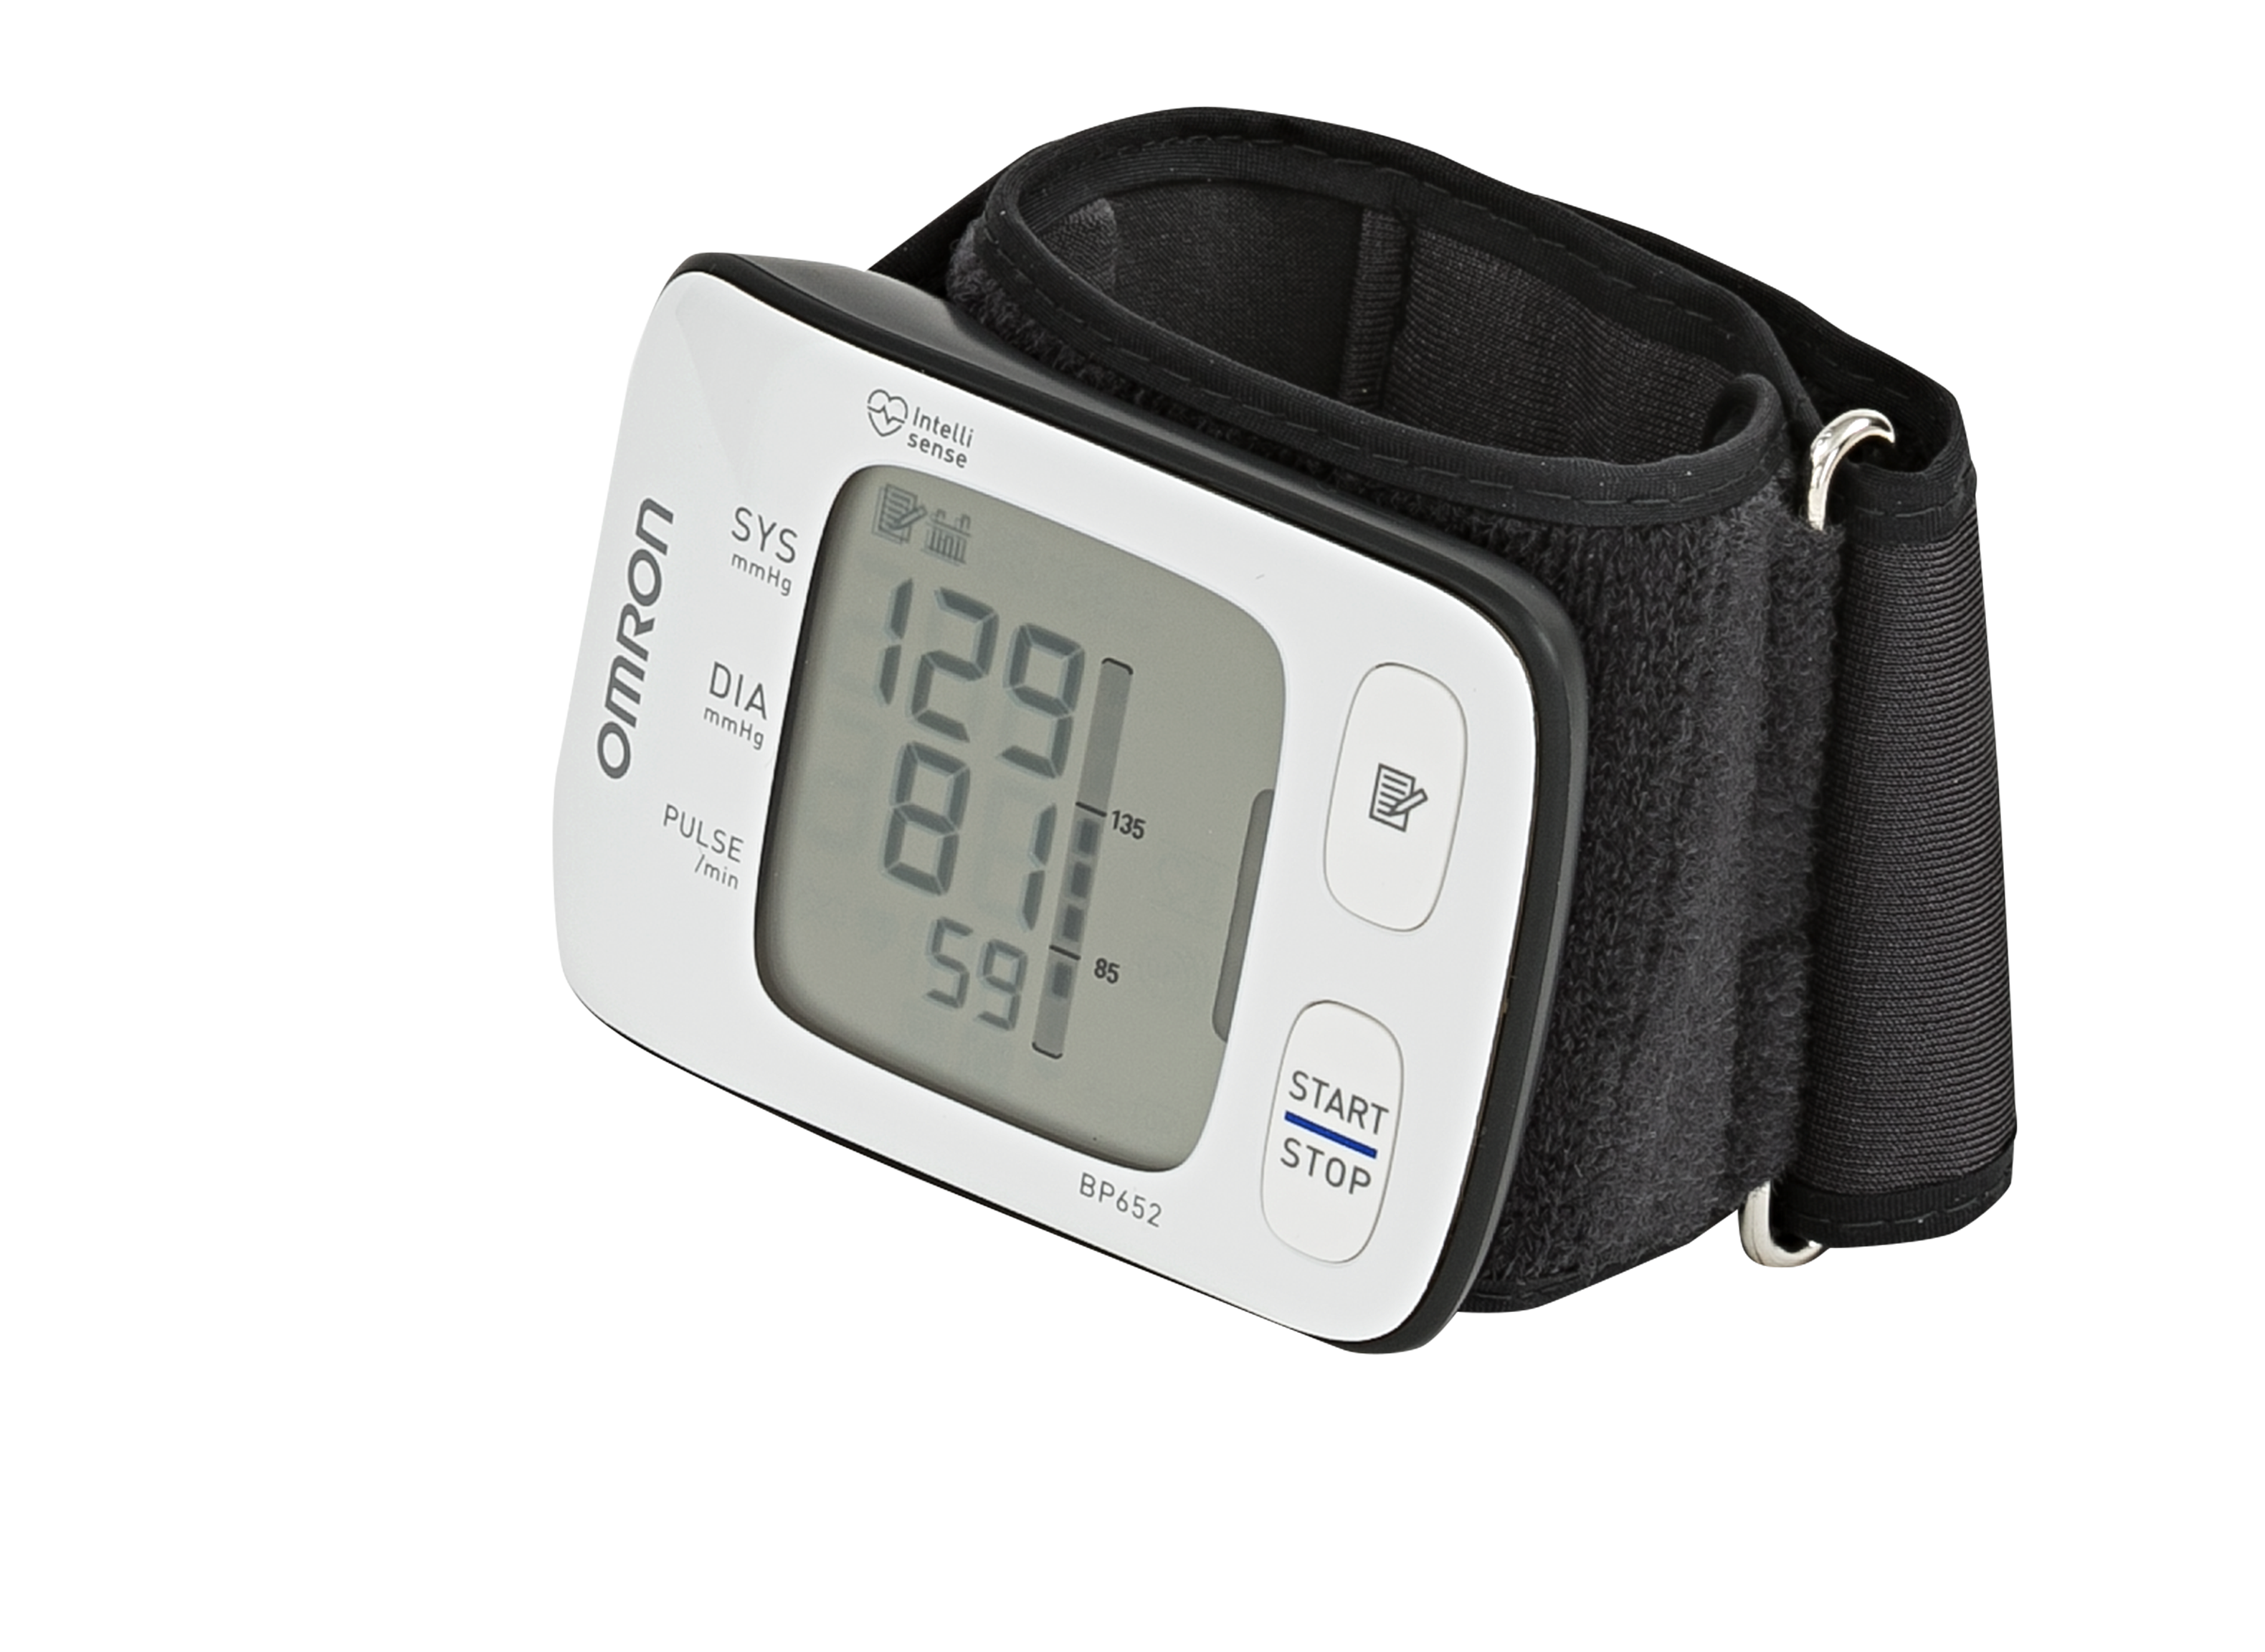 https://crdms.images.consumerreports.org/prod/products/cr/models/384740-bloodpressuremonitors-omron-bp6527series.png